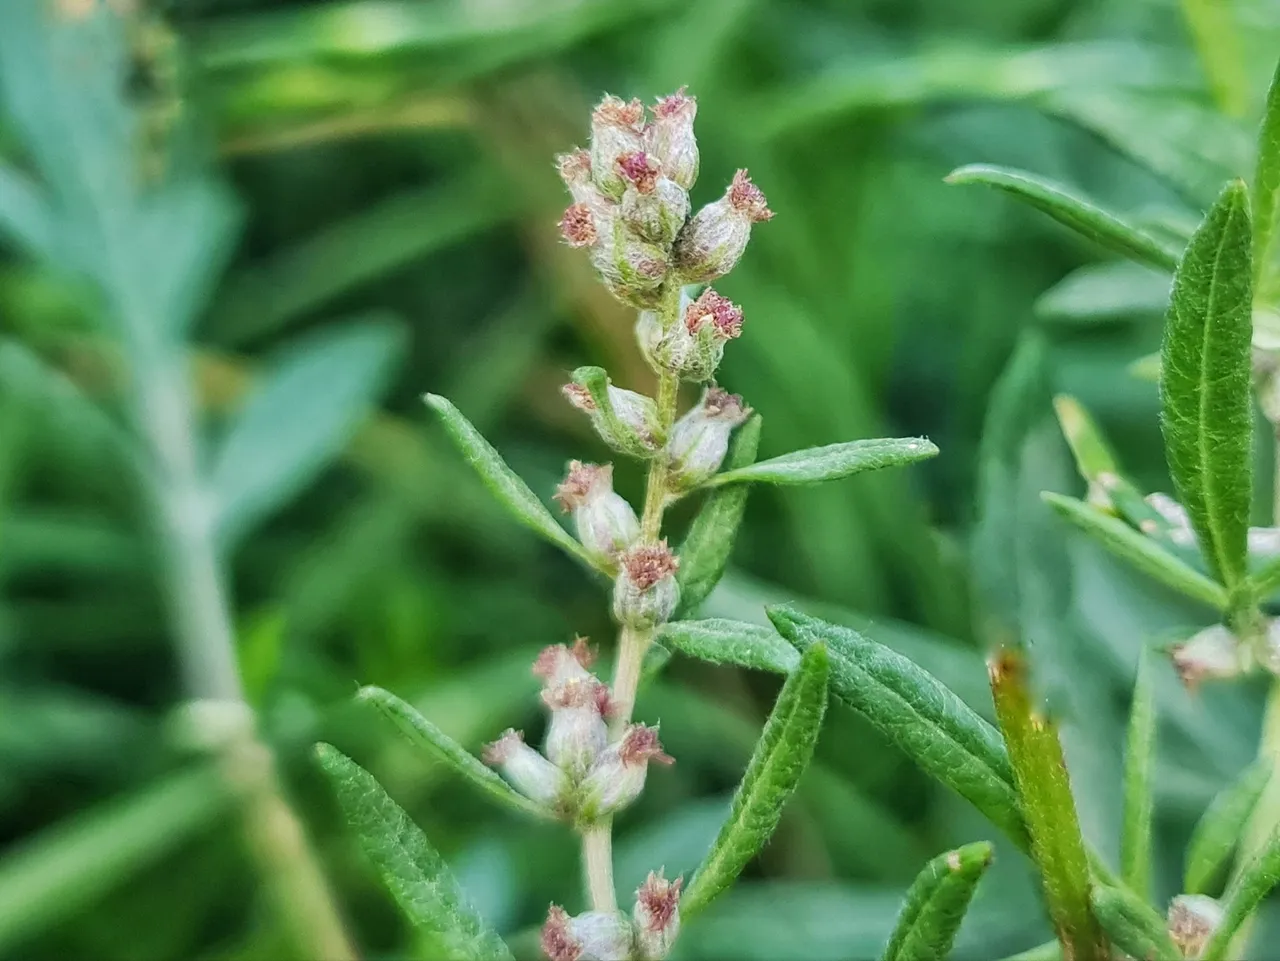 Mugwort flowers are nothing to write home about.